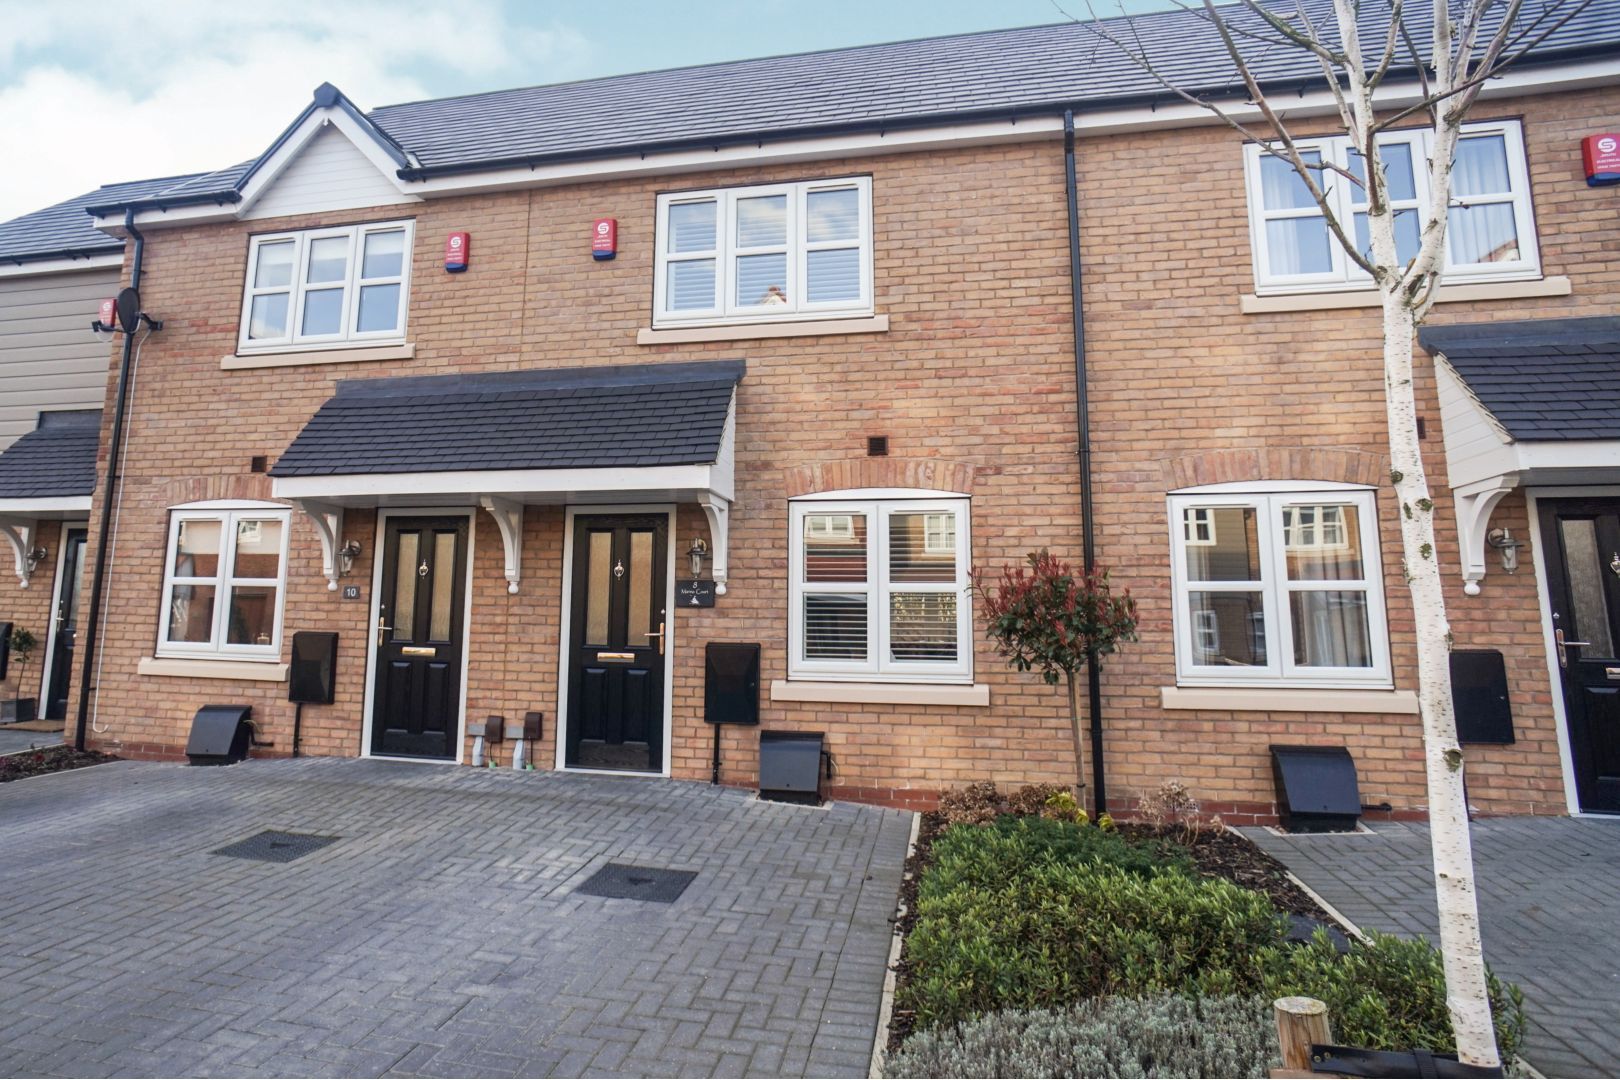 2 bed town house for sale in Marina Court, Burton Waters LN1 - Zoopla